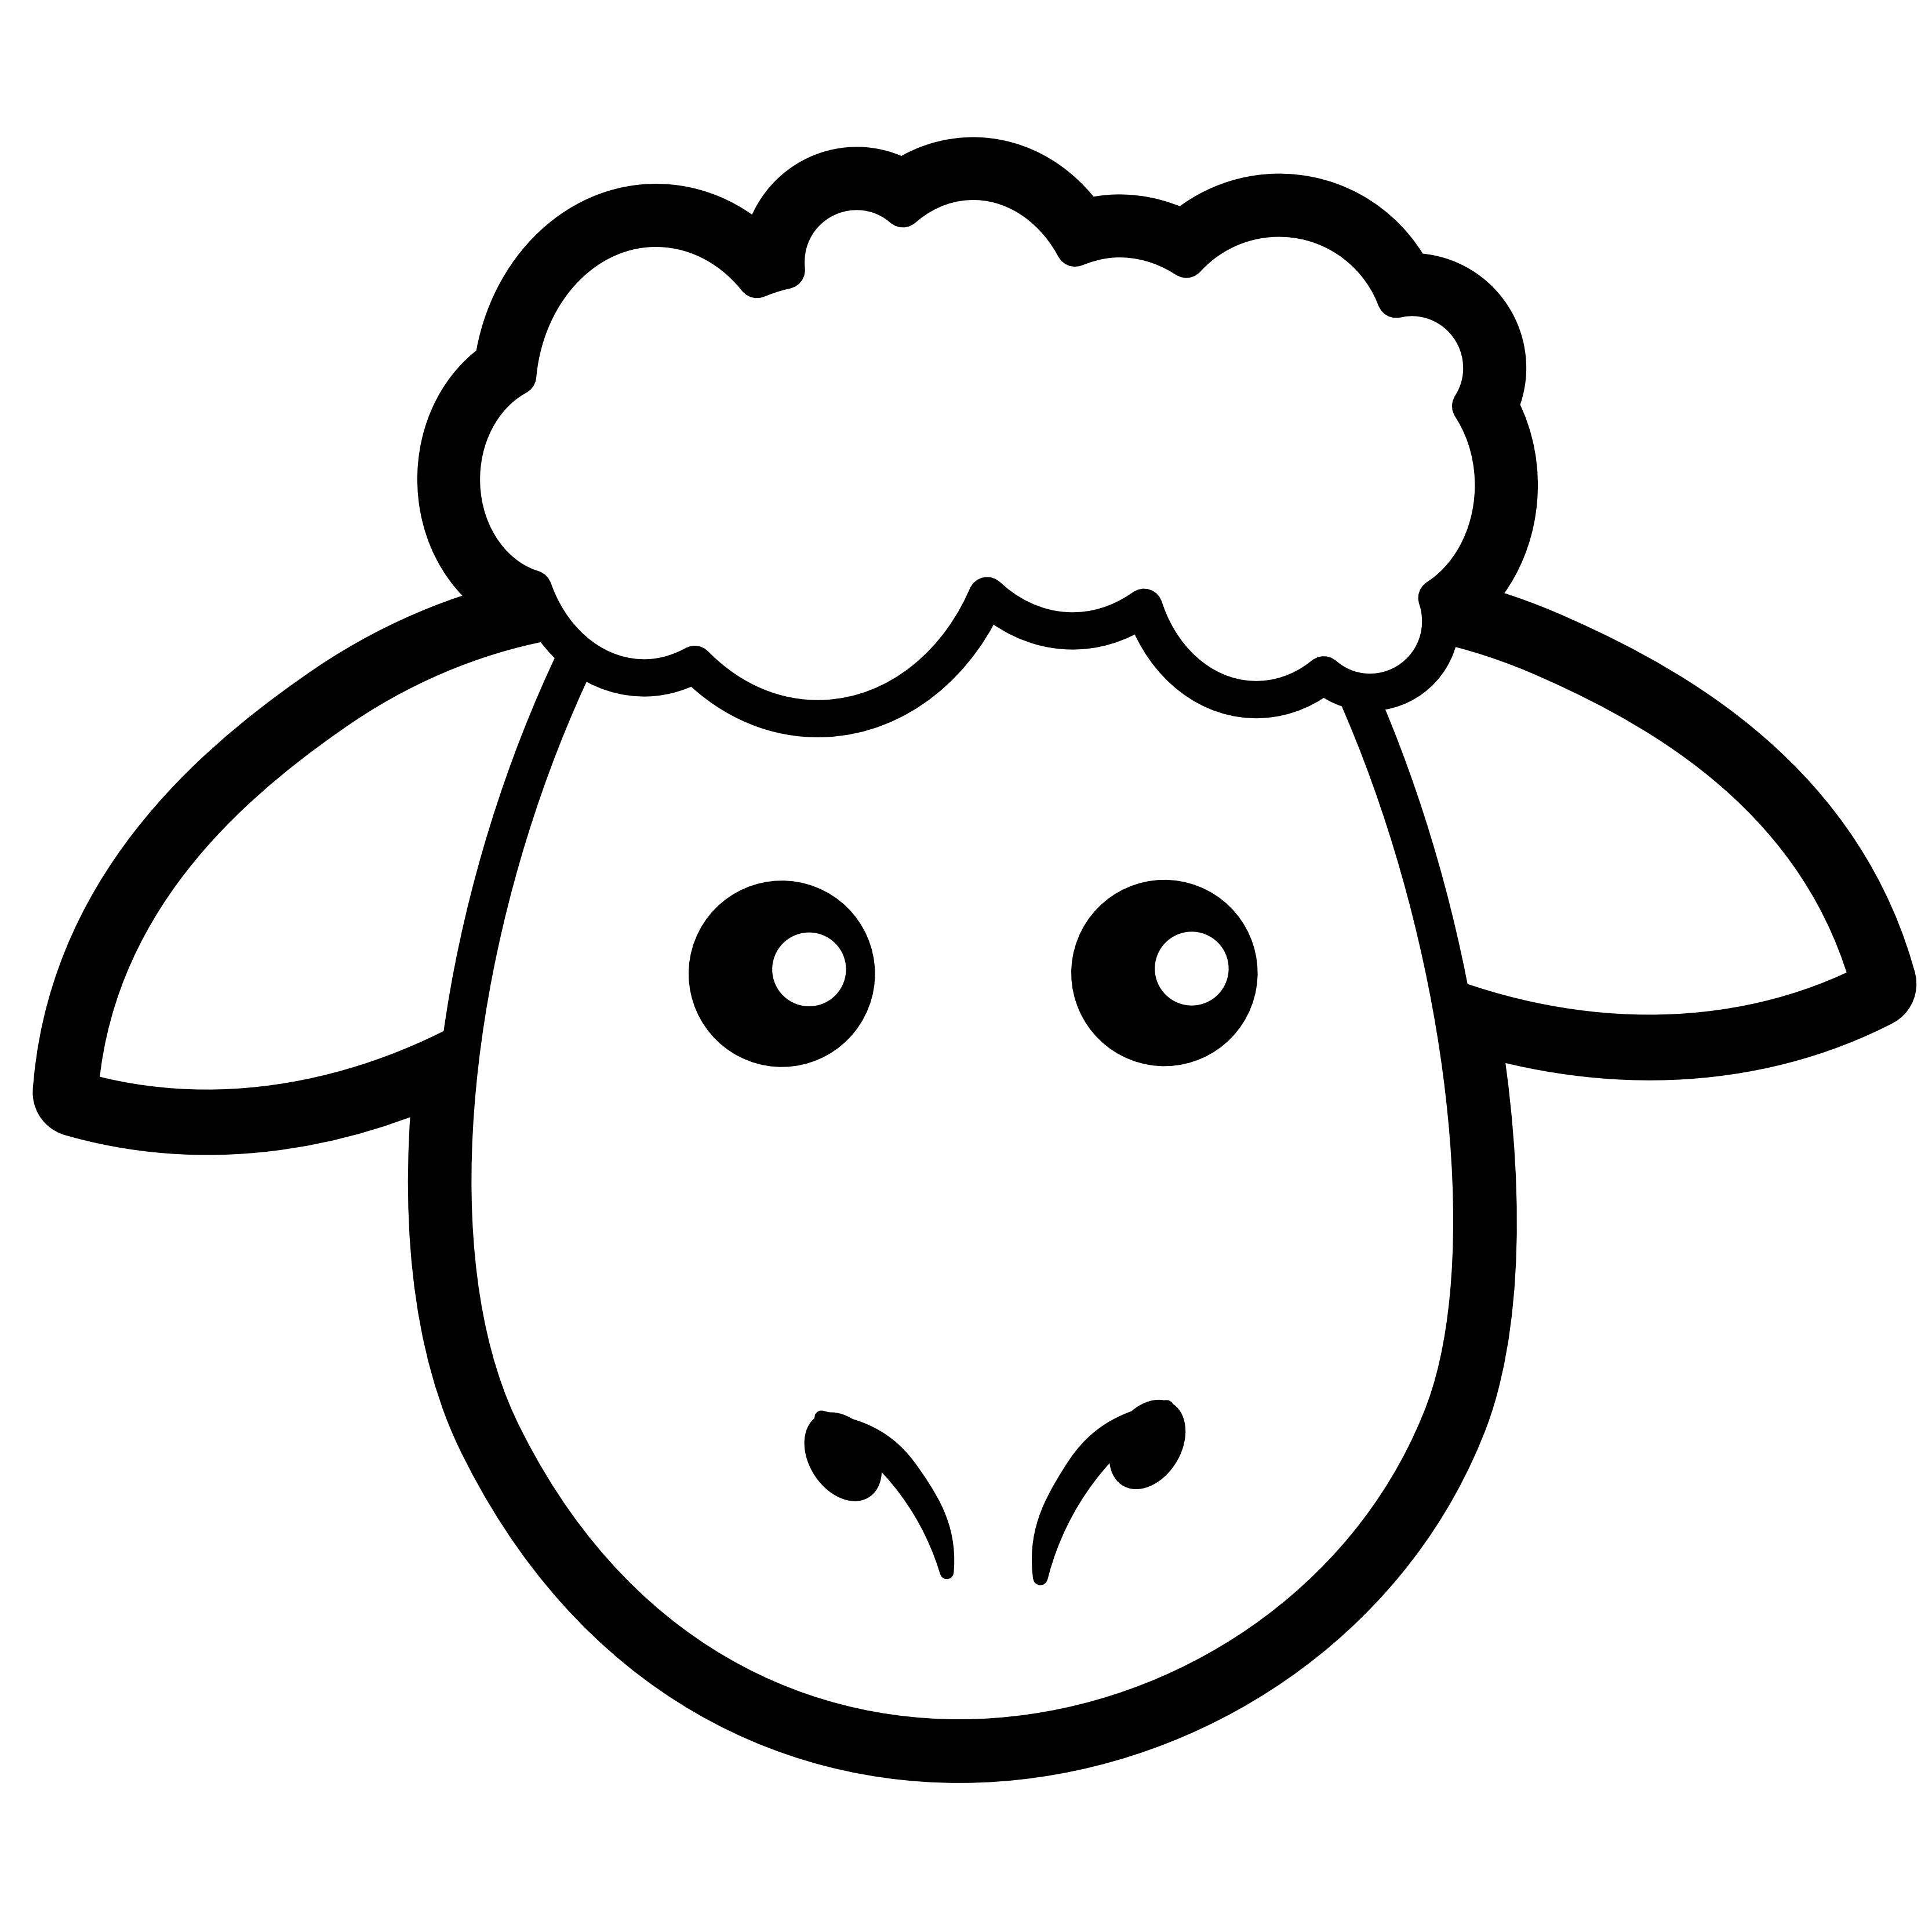 Free Black Sheep Clipart, Download Free Black Sheep Clipart png images